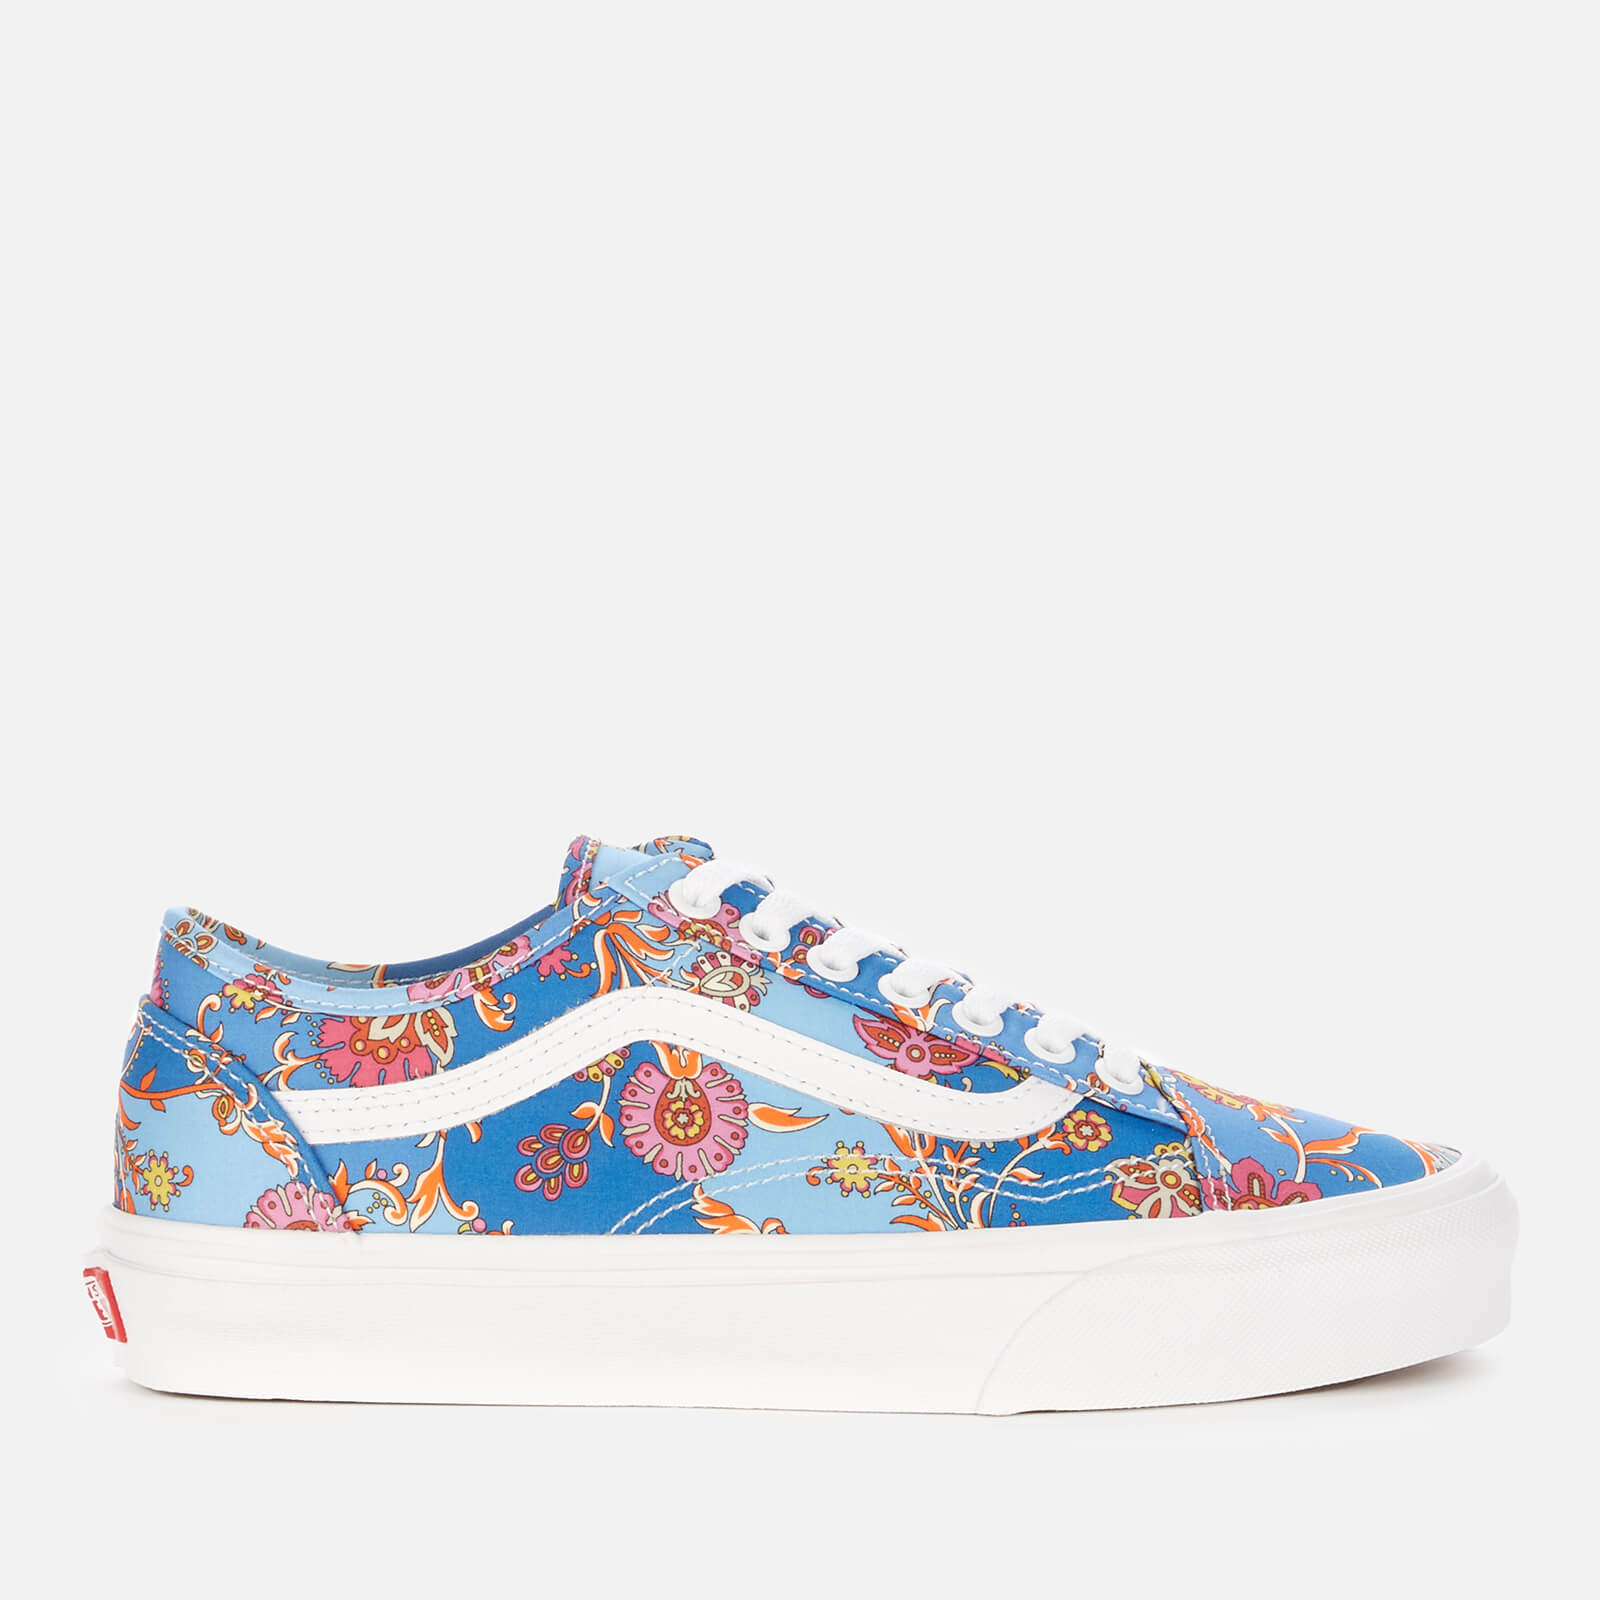 Vans X Liberty London Women's Old Skool Tapered Trainers - Multi/Patchwork Floral - UK 3